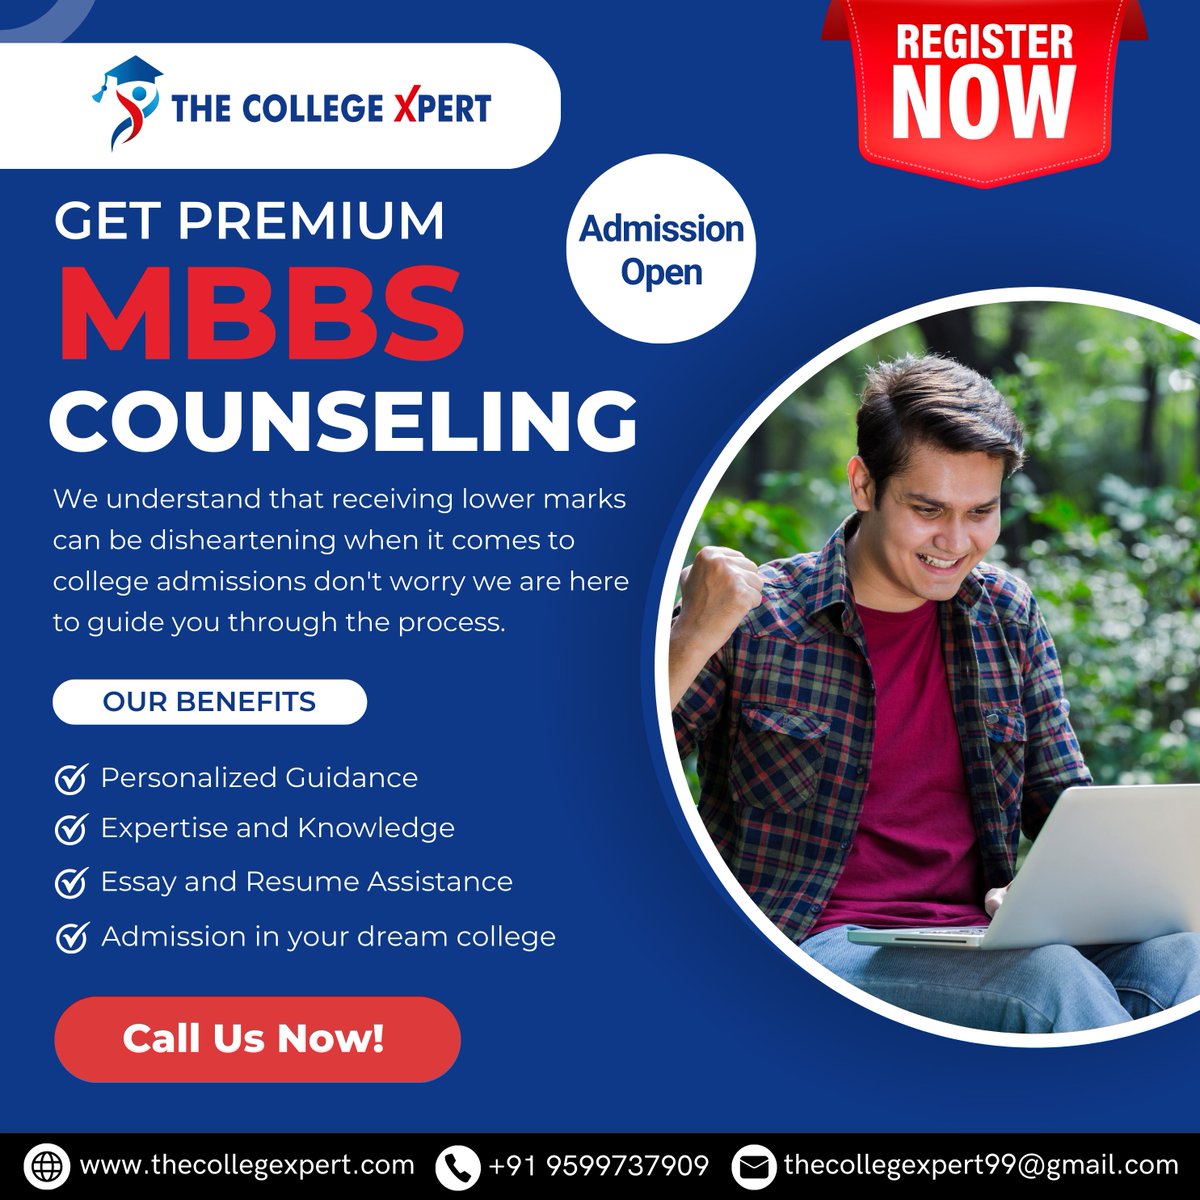 Call Now - 9599737909

#MBBS #MBBSadmission #NEET #mbbsstudent #medical #doctor #aiims #medicalstudent #neetug #neetmds #doctors #neetpreparation #neetexam #admissions #bestmbbscollage #study #education #mbbseducation #studyabroad #MBBS #Meicaeducation #CollegeXpert #detechcell